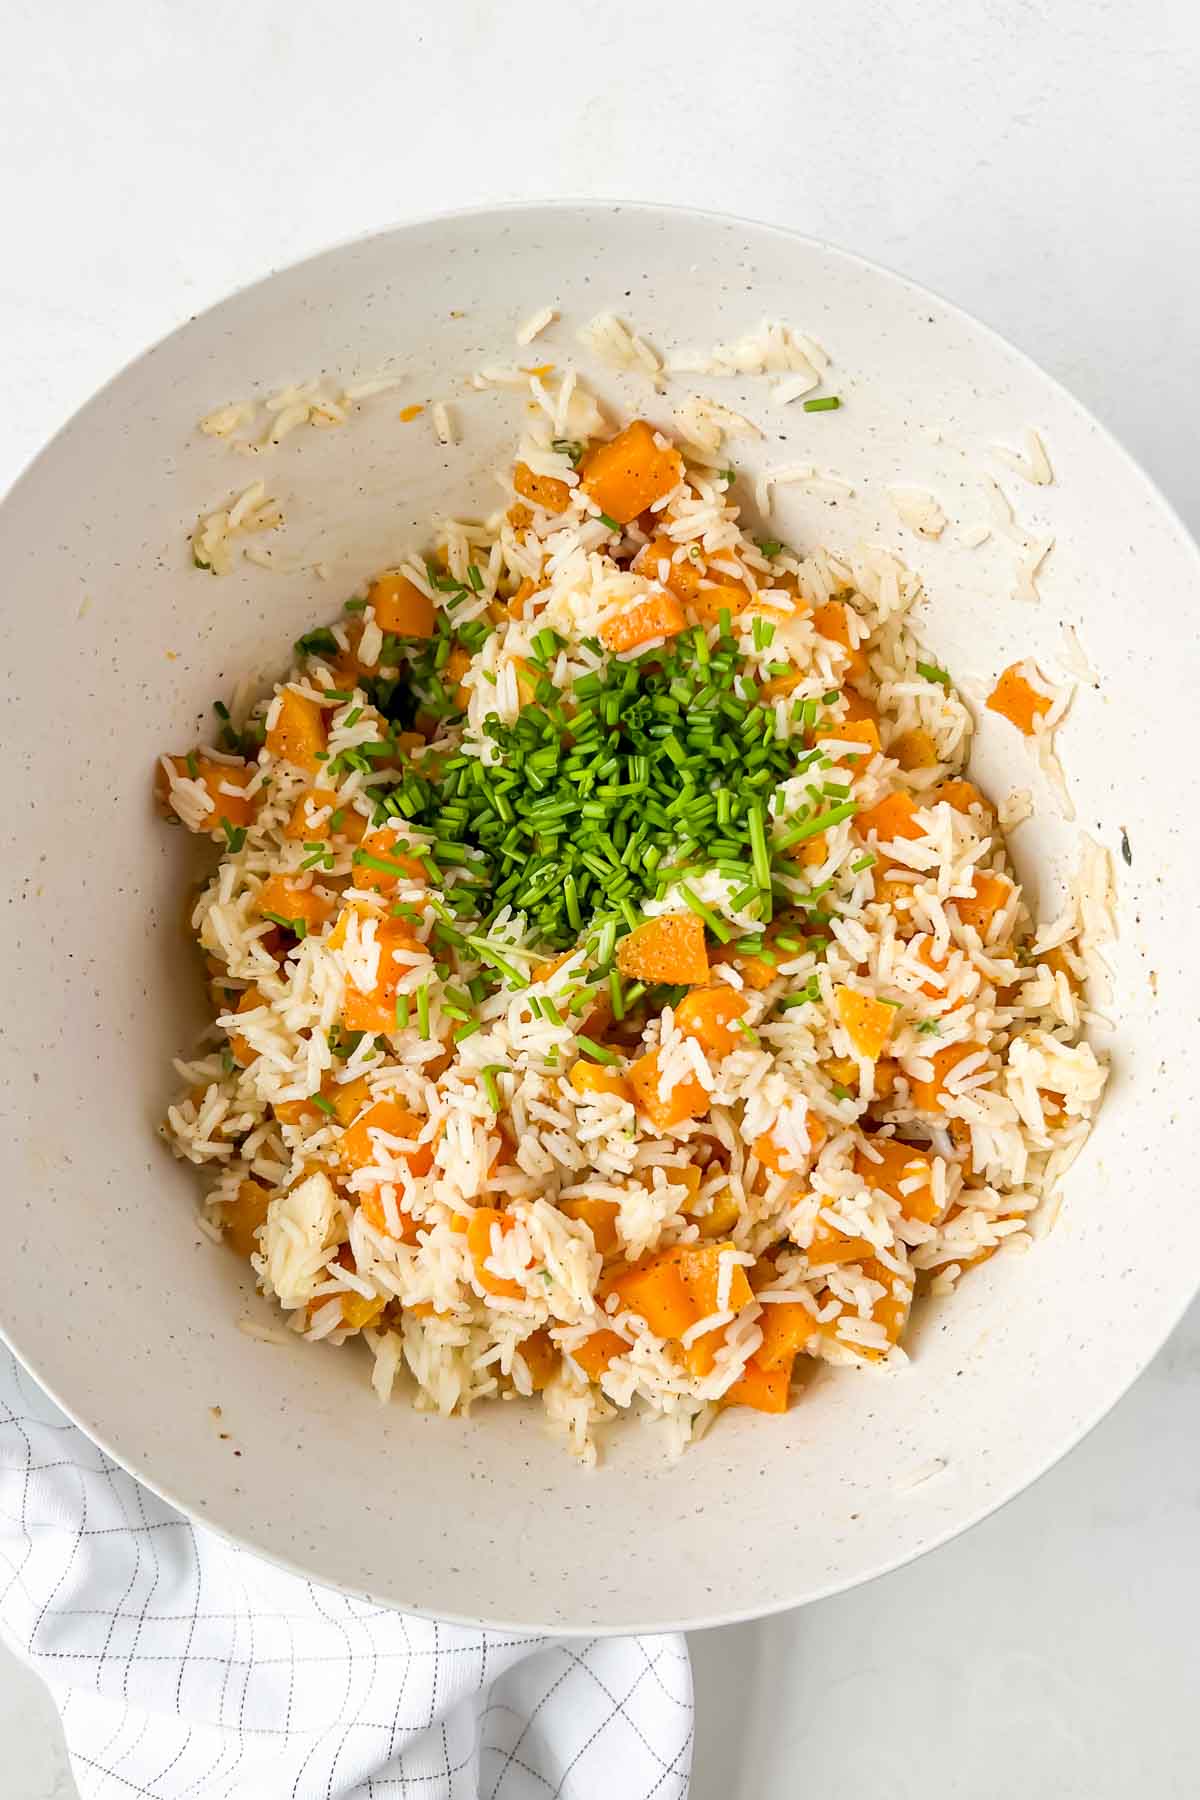 basmati rice and seasoned butternut squash and herbs in white mixing bowl.